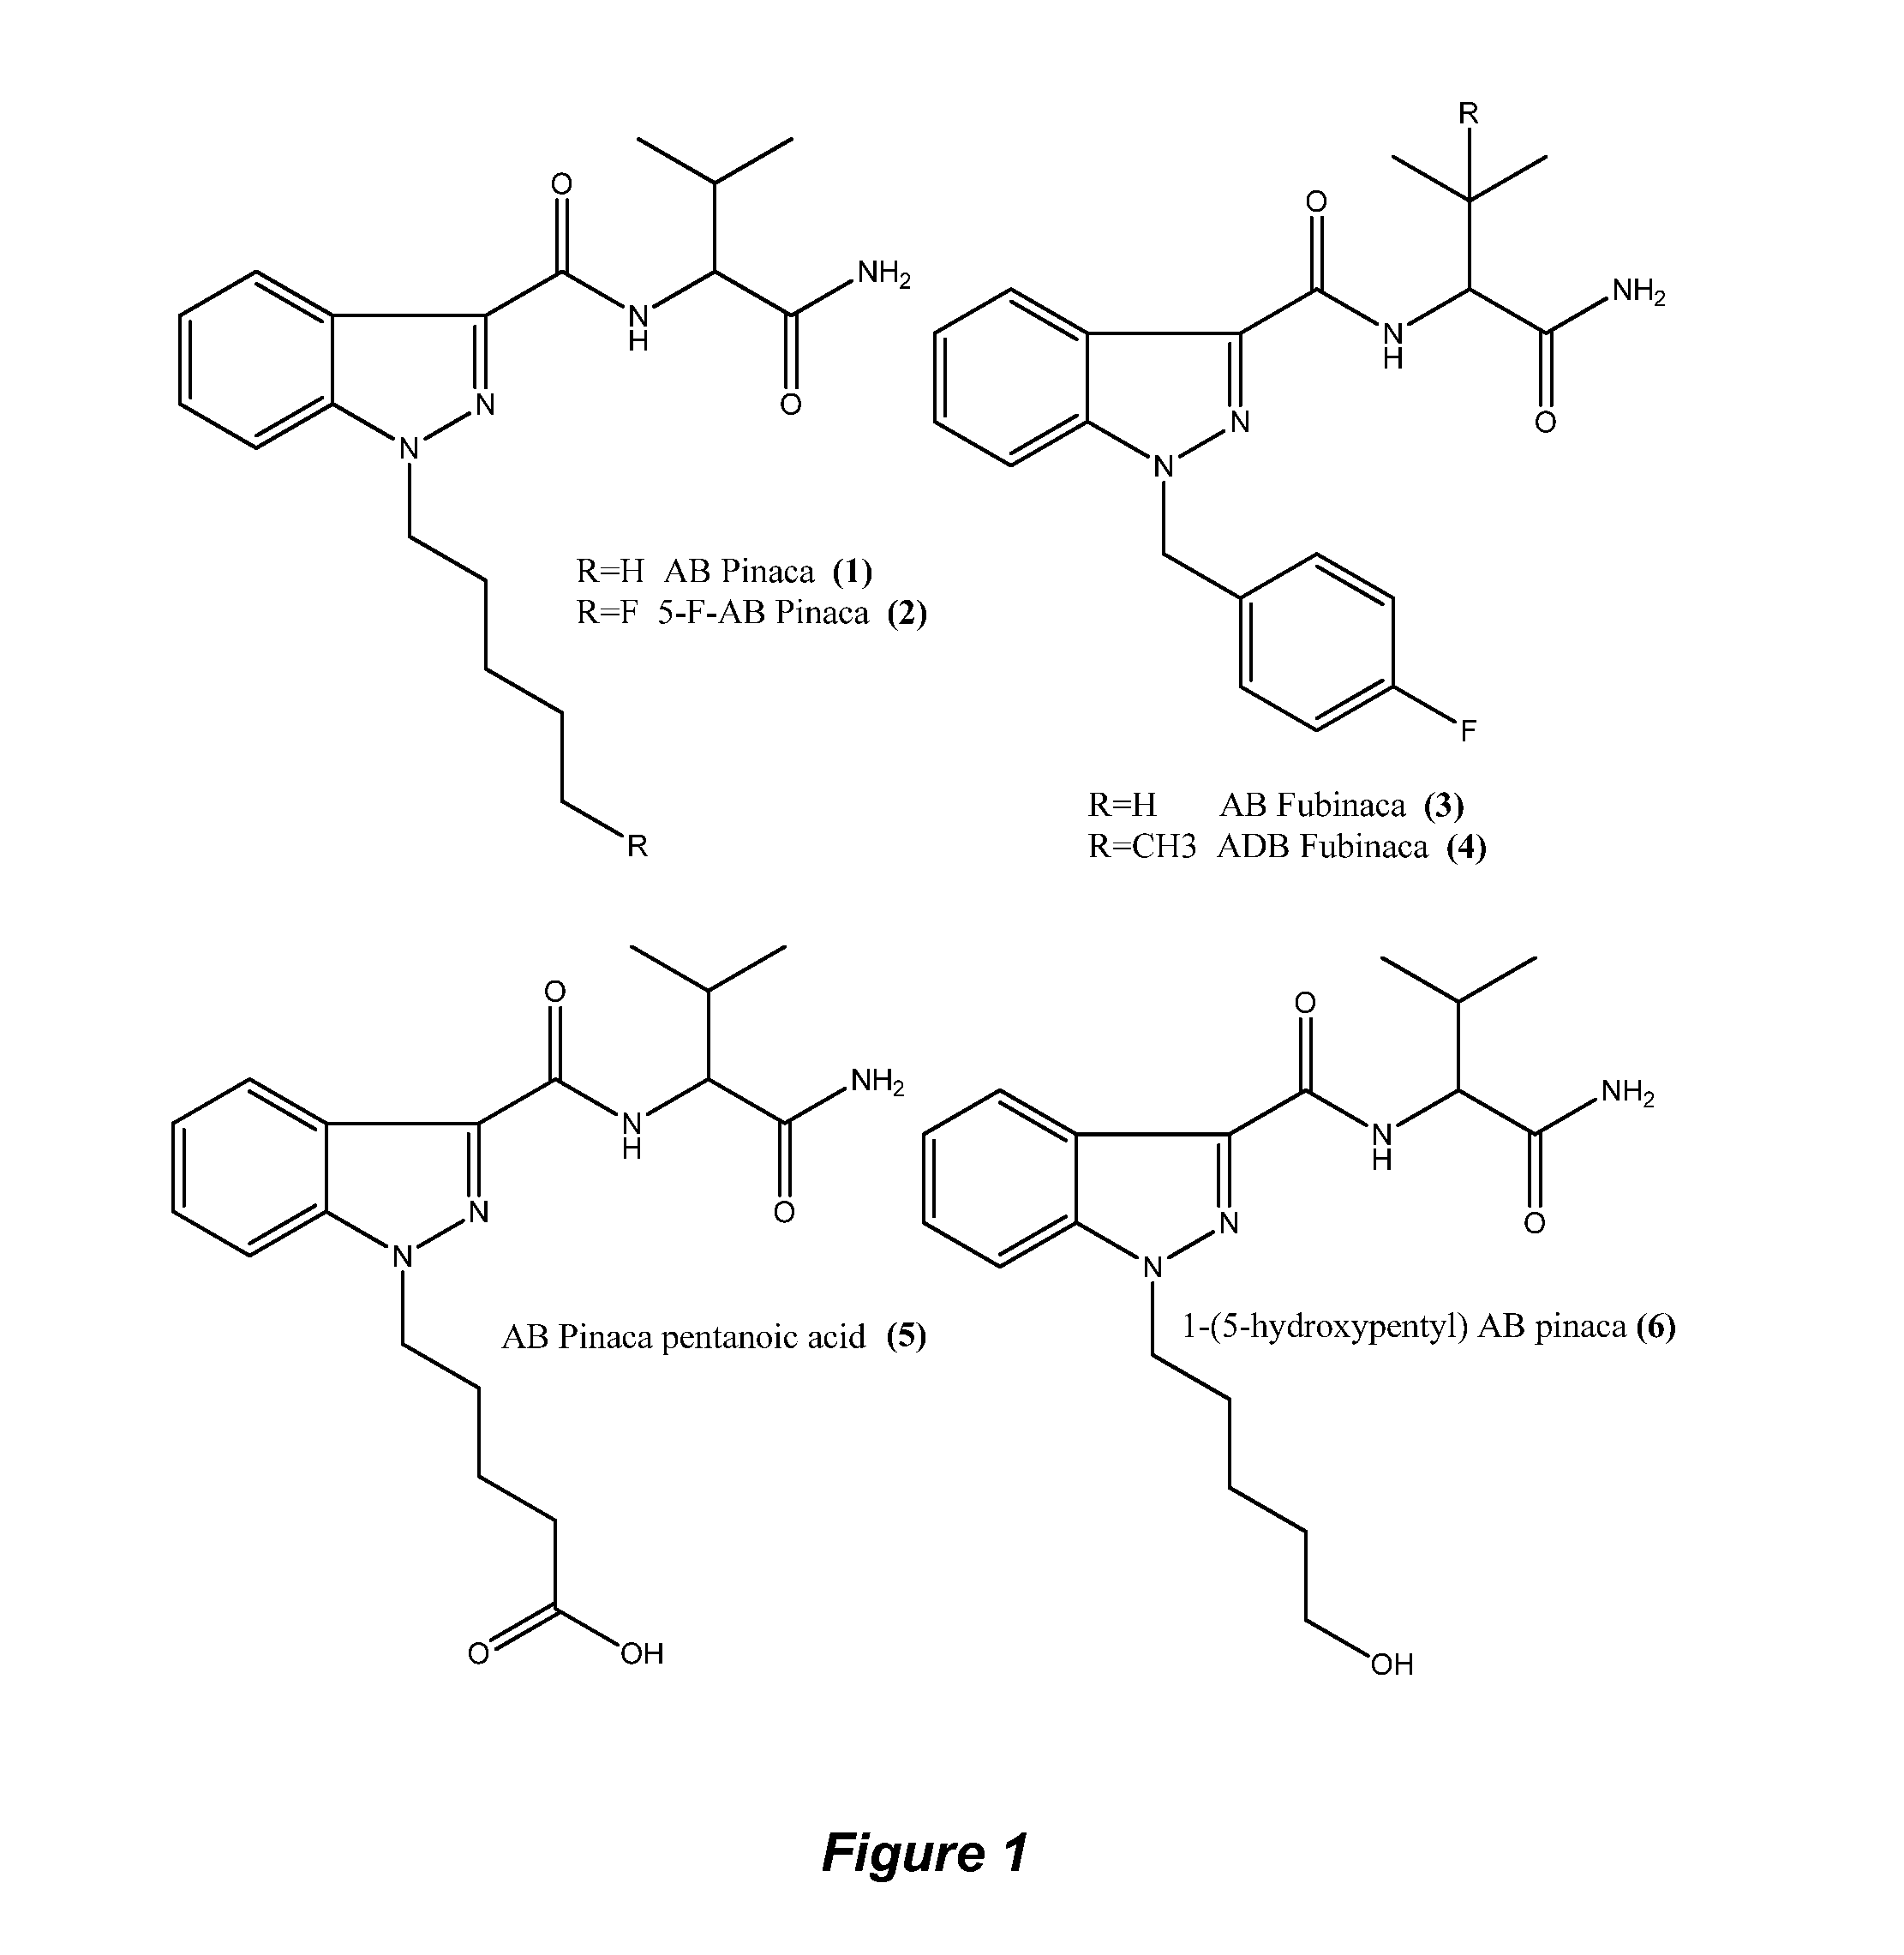 Detection of indazole synthetic cannabinoids